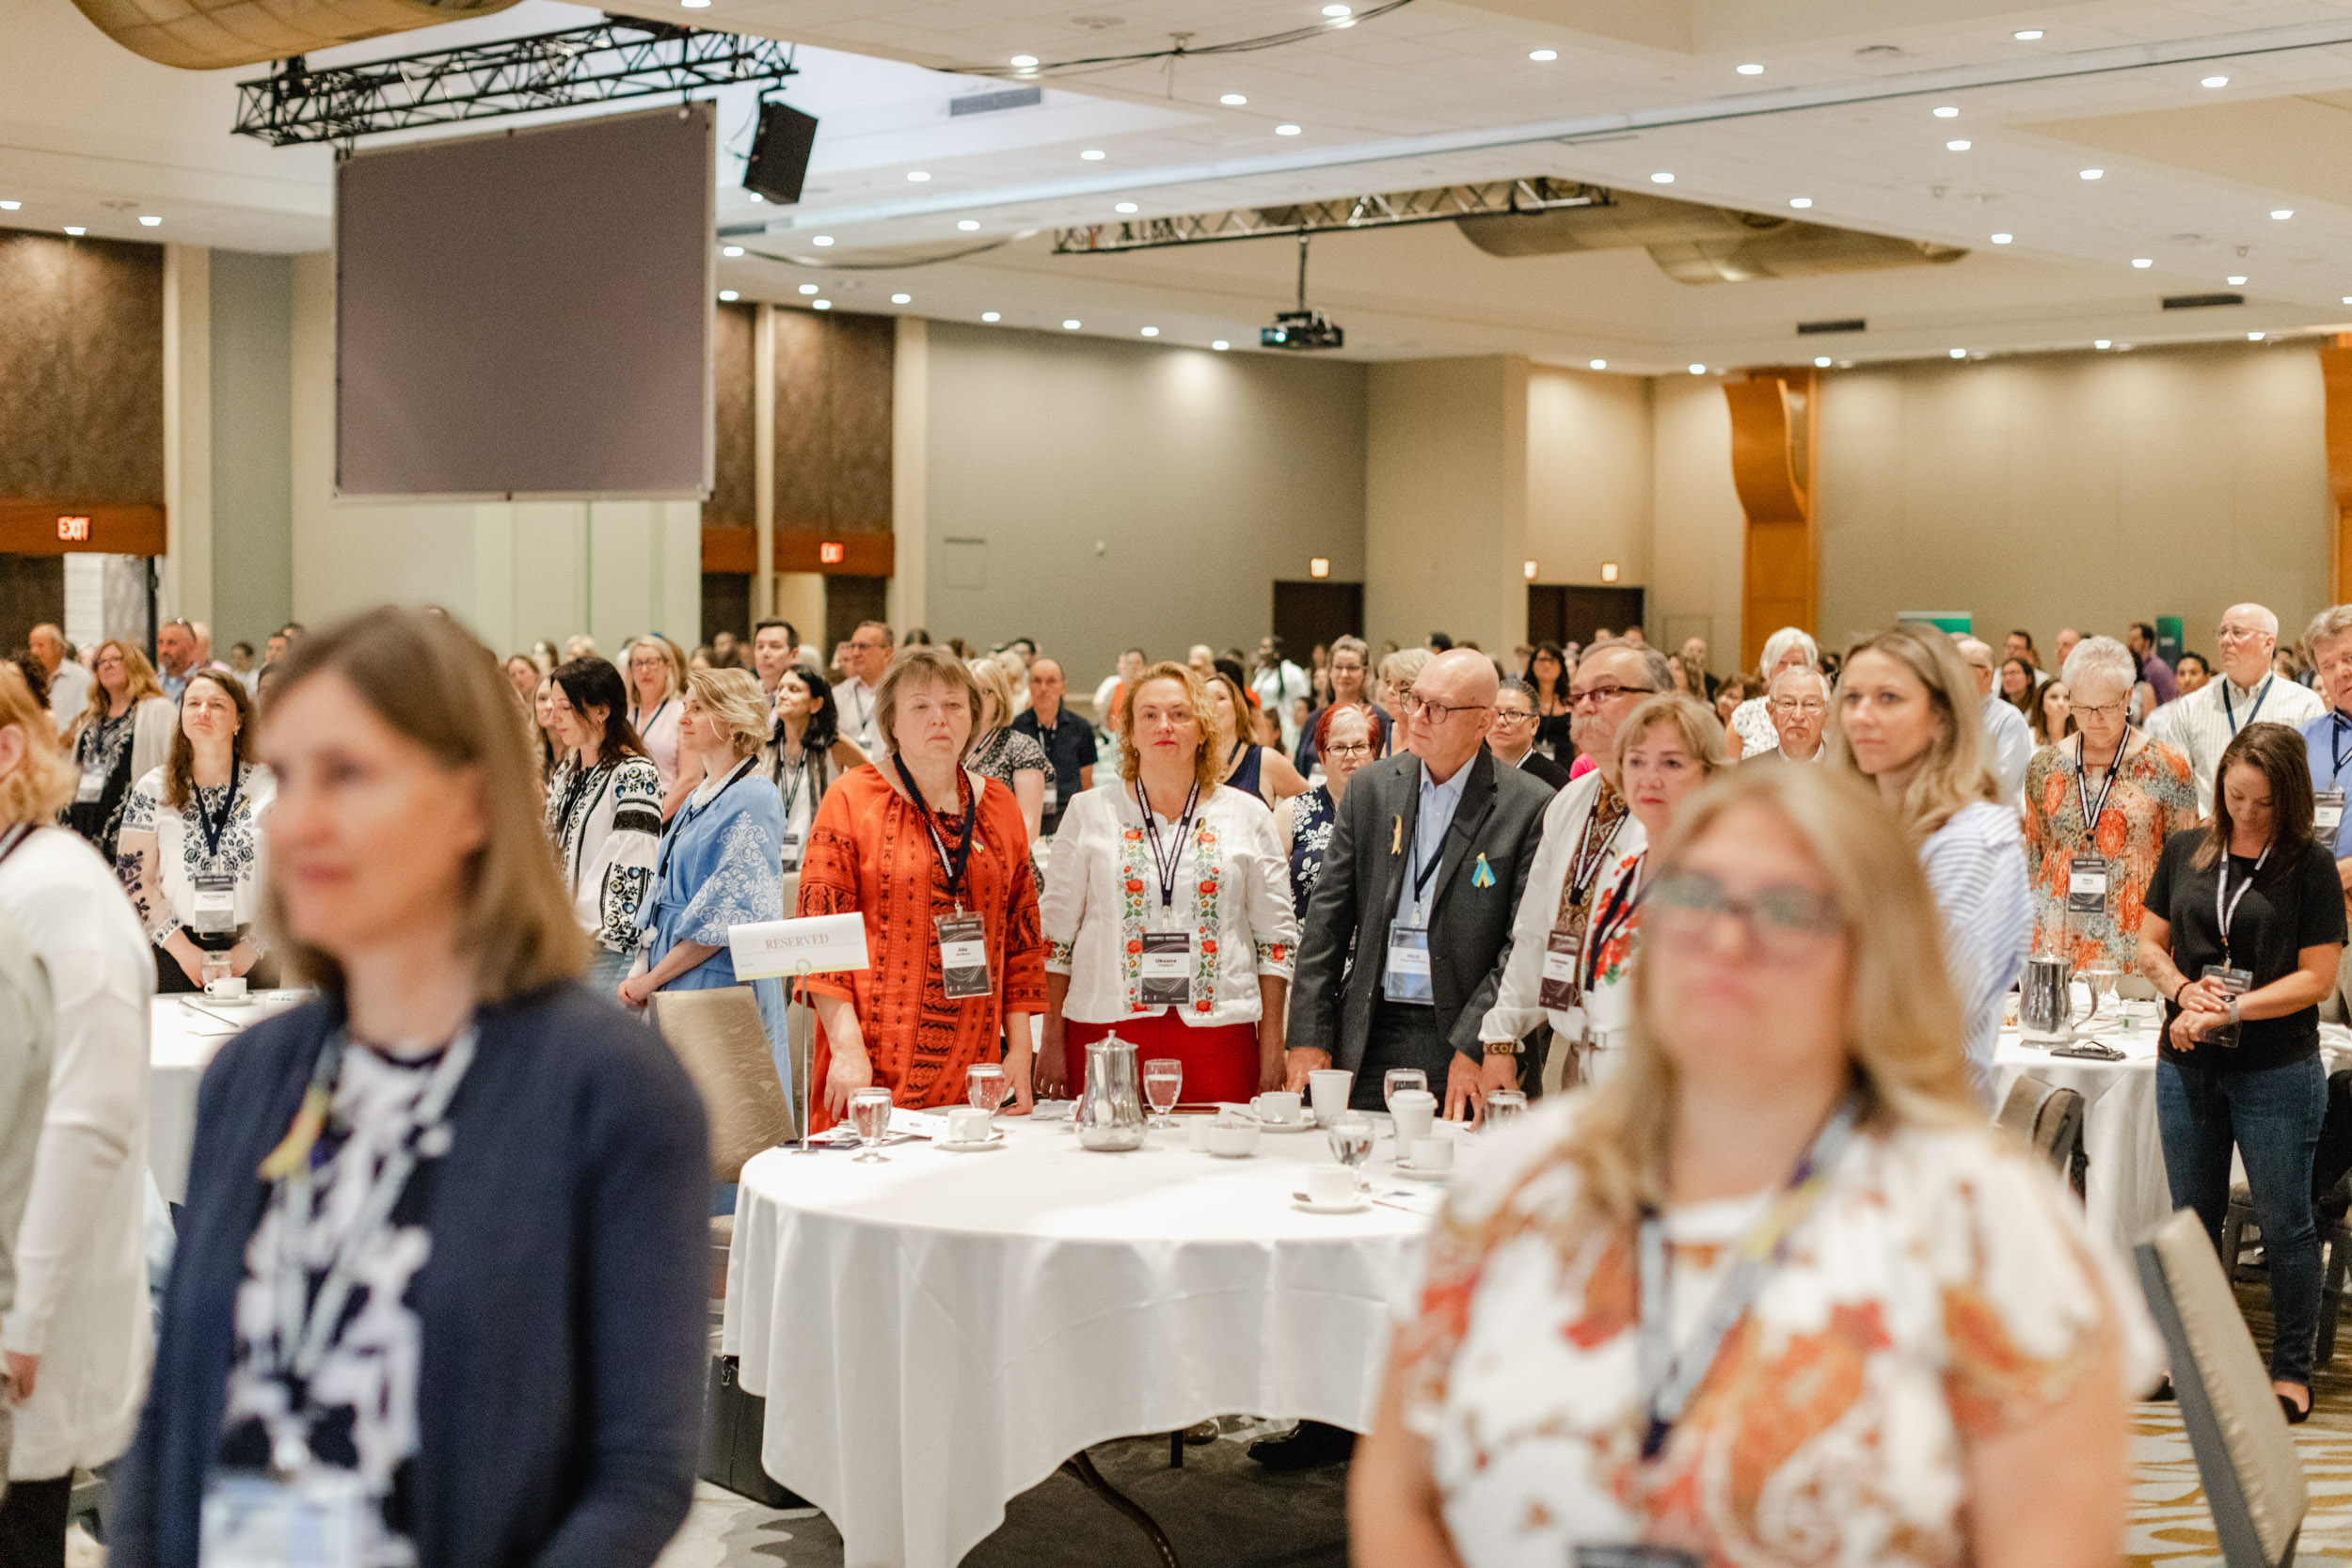 A large group of people gathered for a conference in a room, captured through photography.